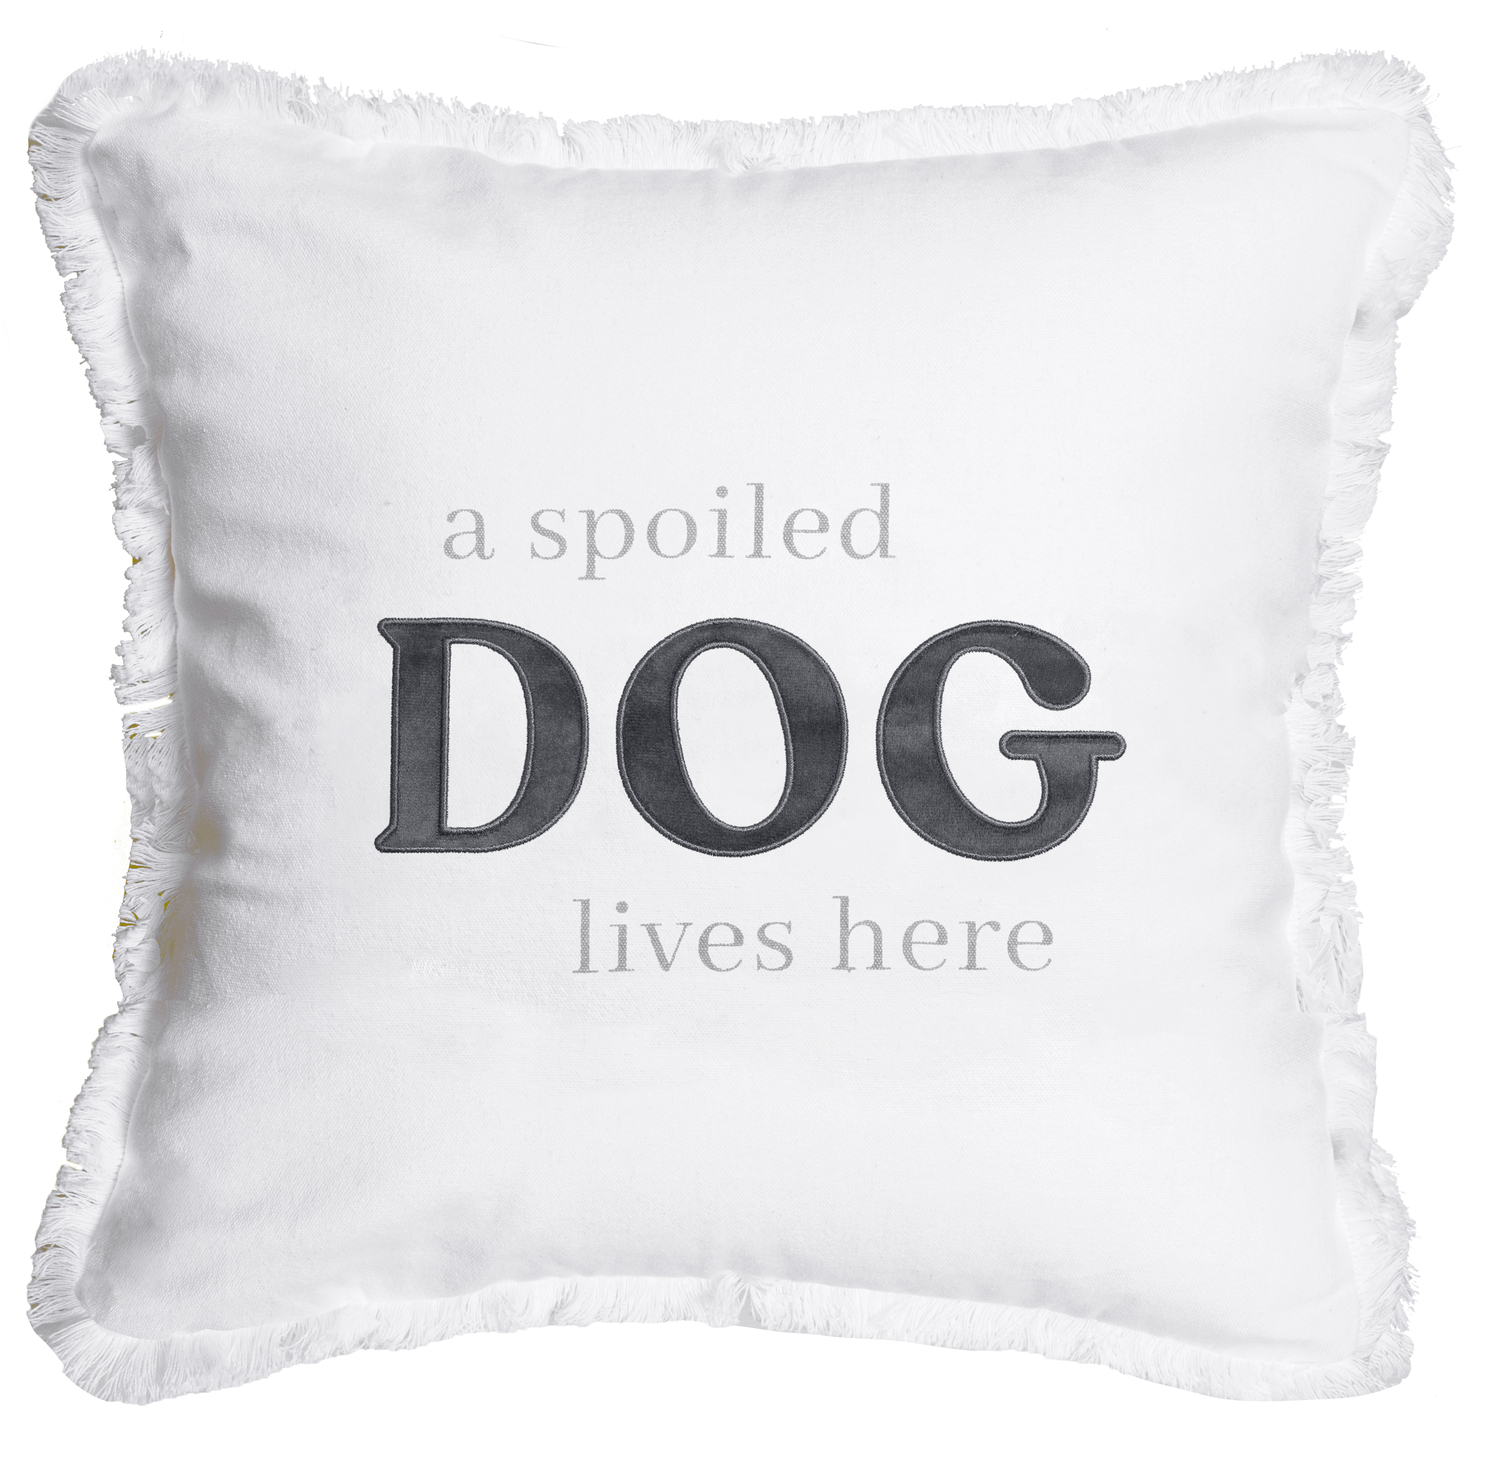 Spoiled Dog by Tossing Words Around - Spoiled Dog - 18" Throw Pillow Cover